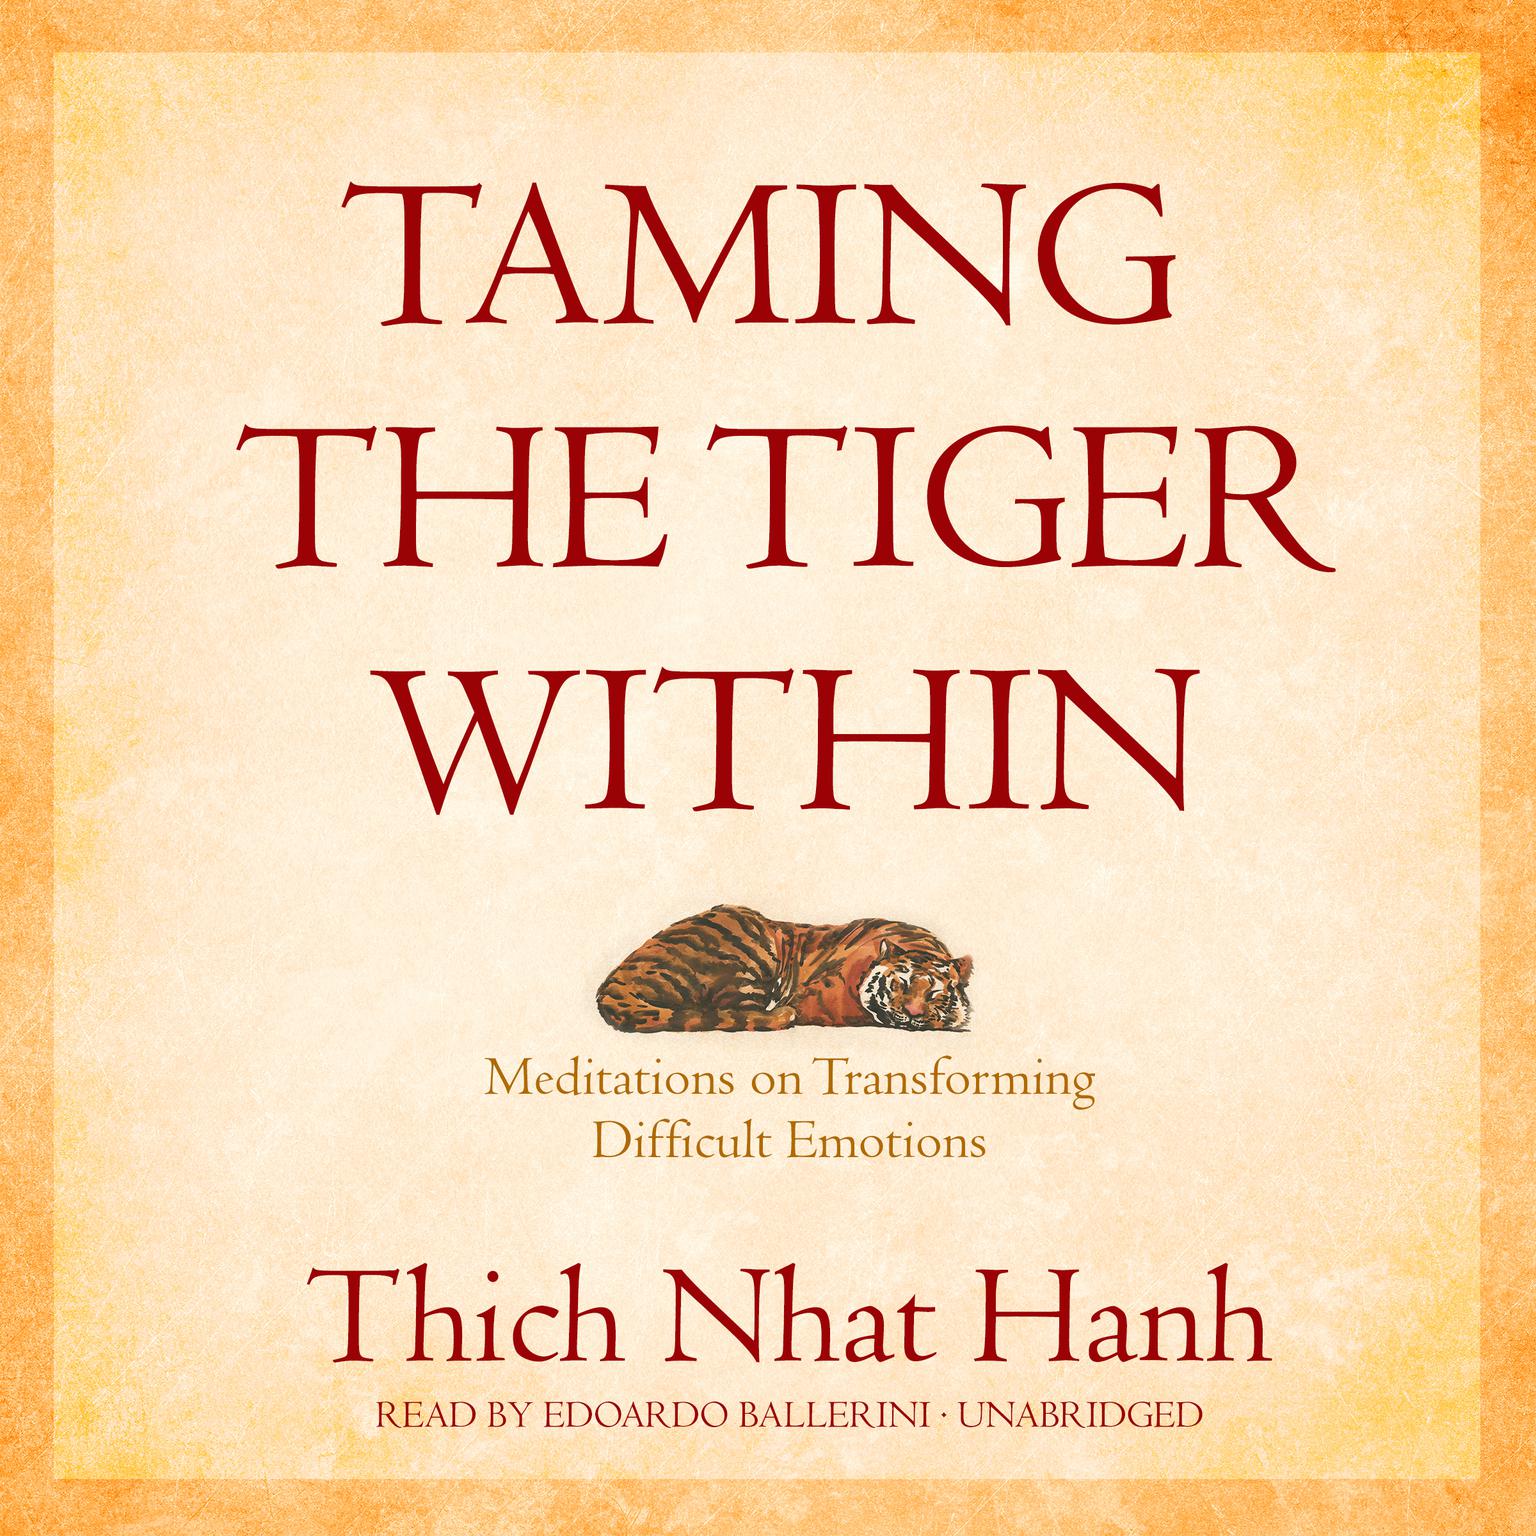 Taming the Tiger Within: Meditations on Transforming Difficult Emotions Audiobook, by Thich Nhat Hanh